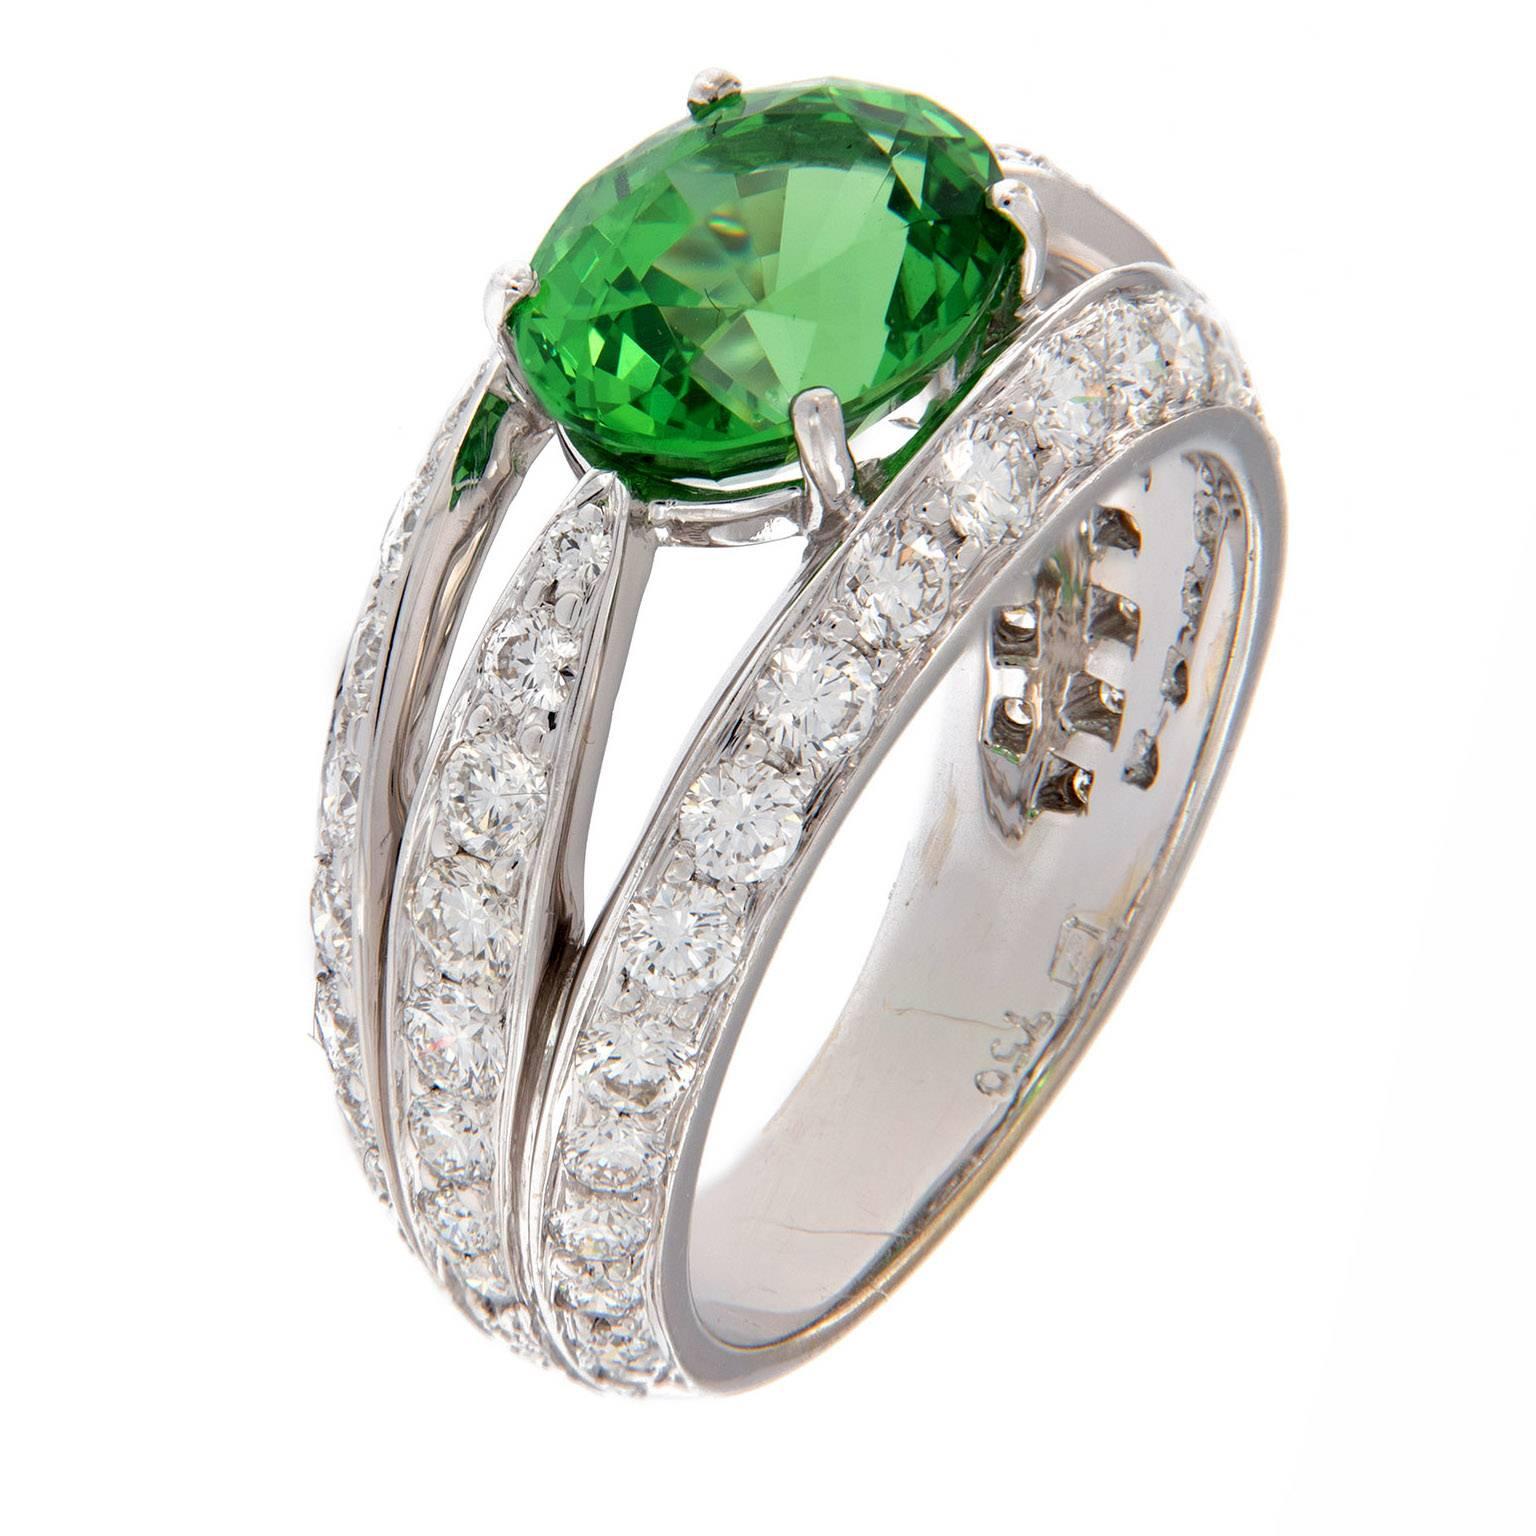 Gumuchian 18K white gold ring from the Luna Collection centers around an oval vivid green tsavorite accented with pave set diamonds. Weighs 6.5 grams. Ring Size 6.5

Tsavorite 3.12 ct
Diamonds 1.45 cttw